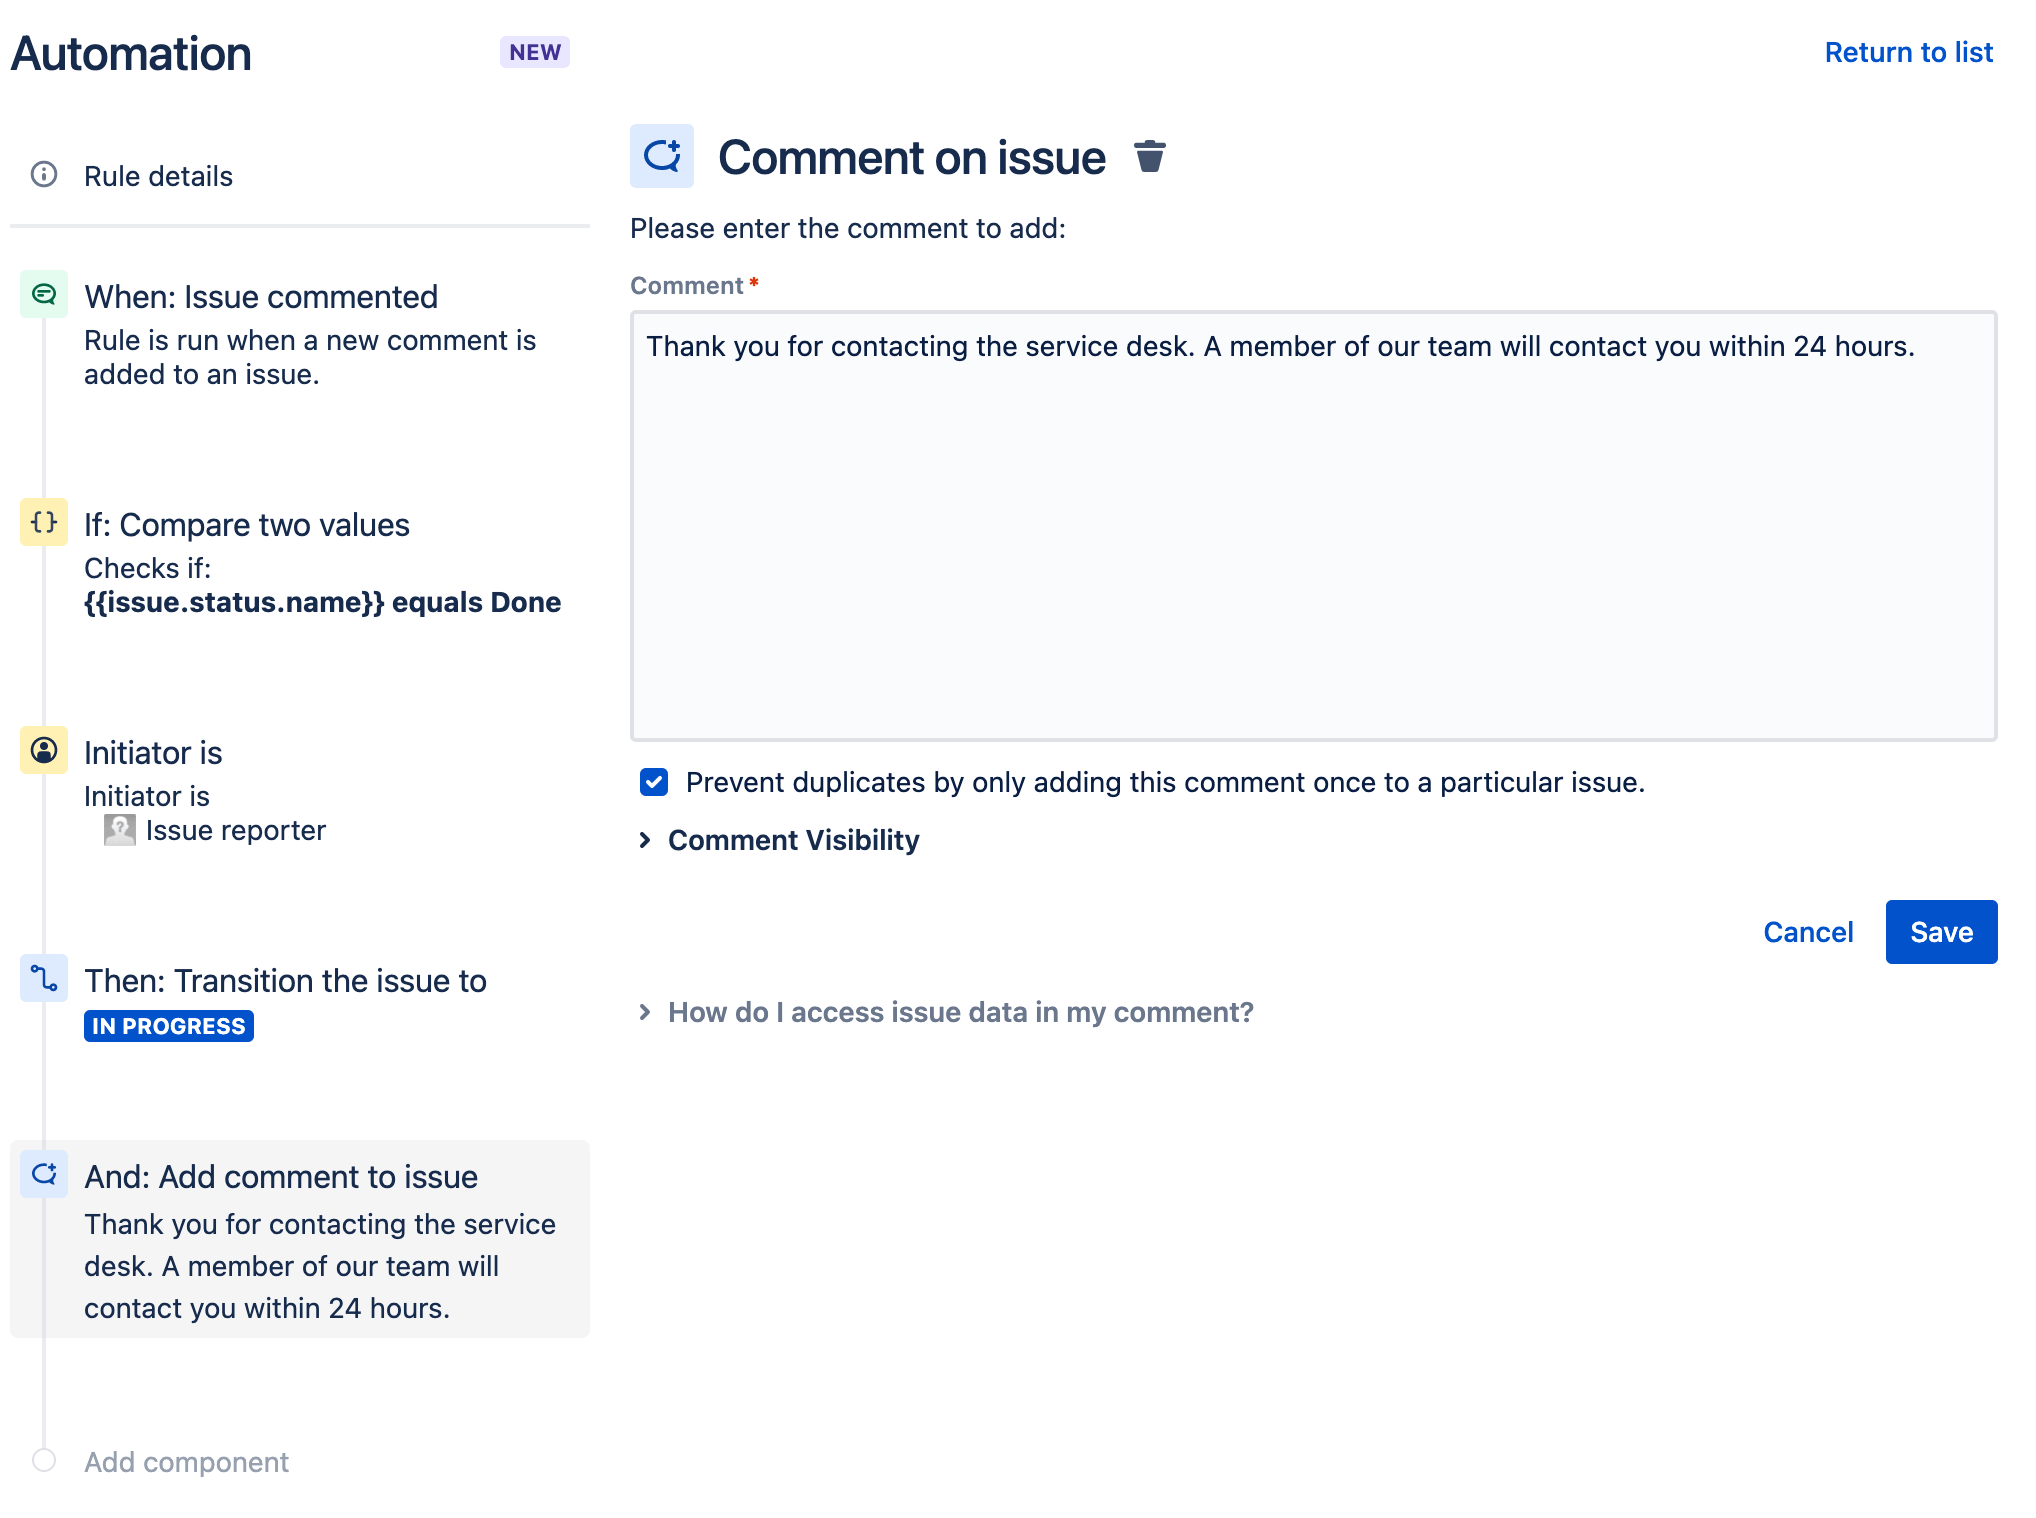 Adding a comment to the issue in automation for Jira Service Management